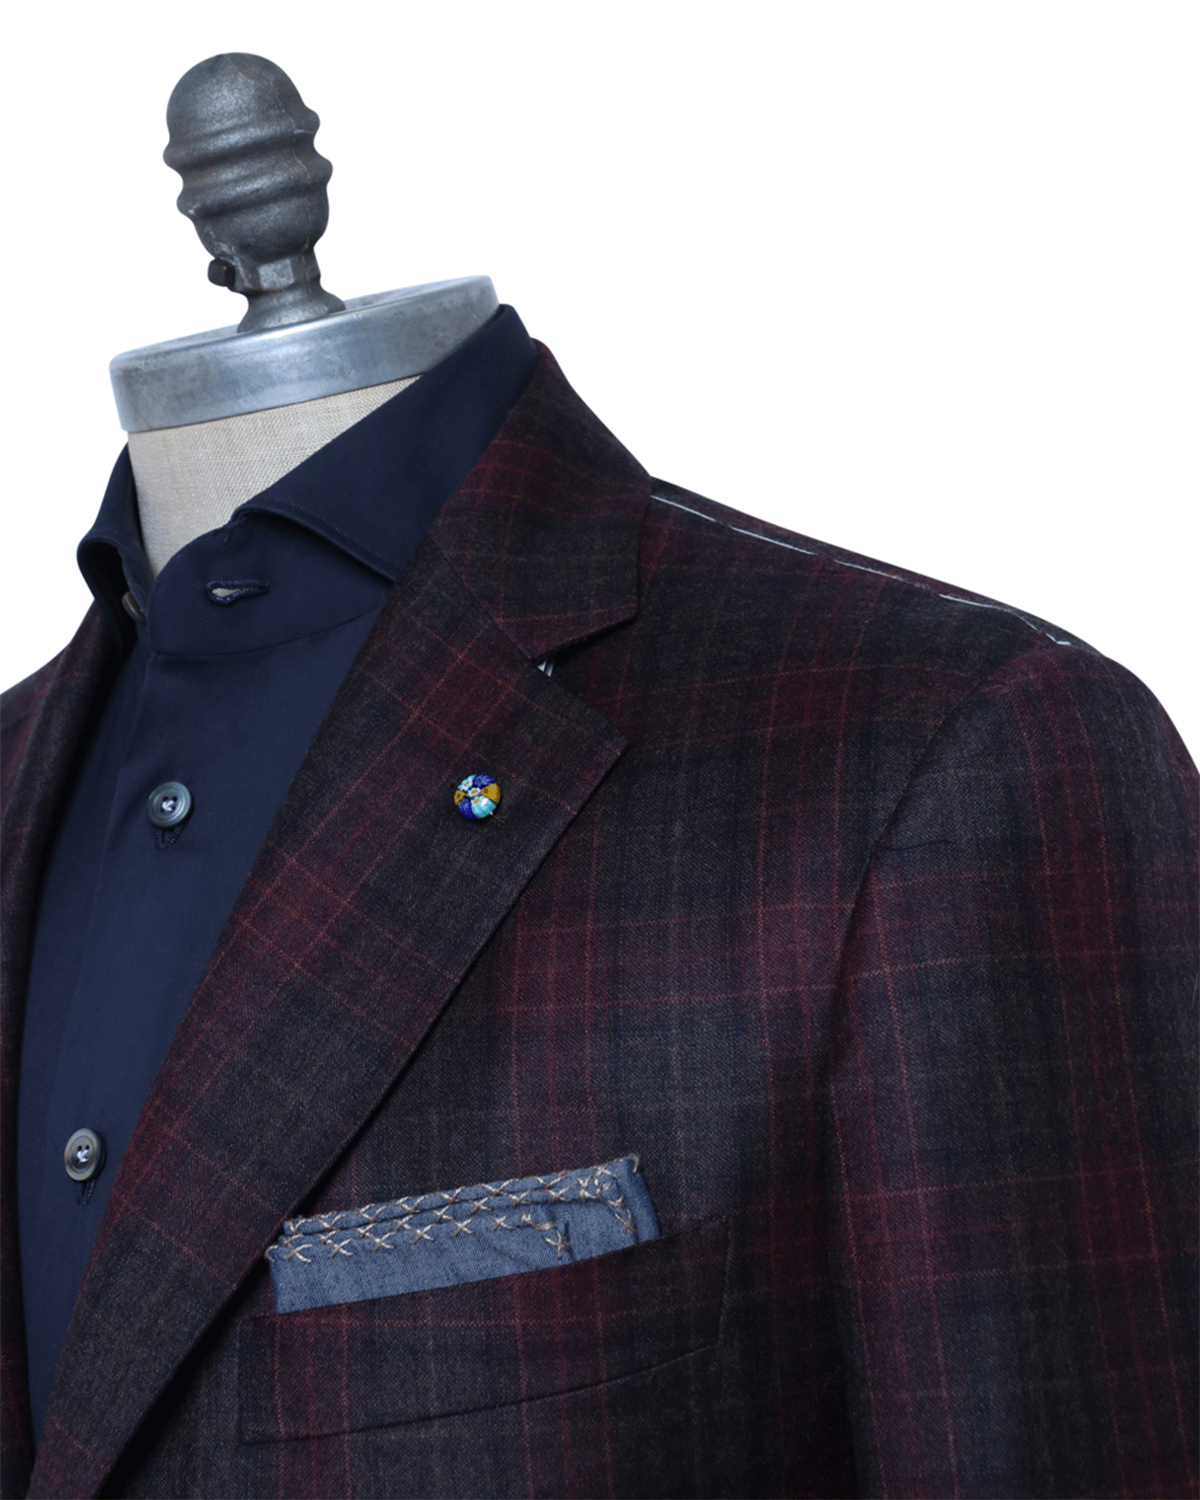 Red and Brown Windowpane Plaid Deconstructed Wool Sportcoat